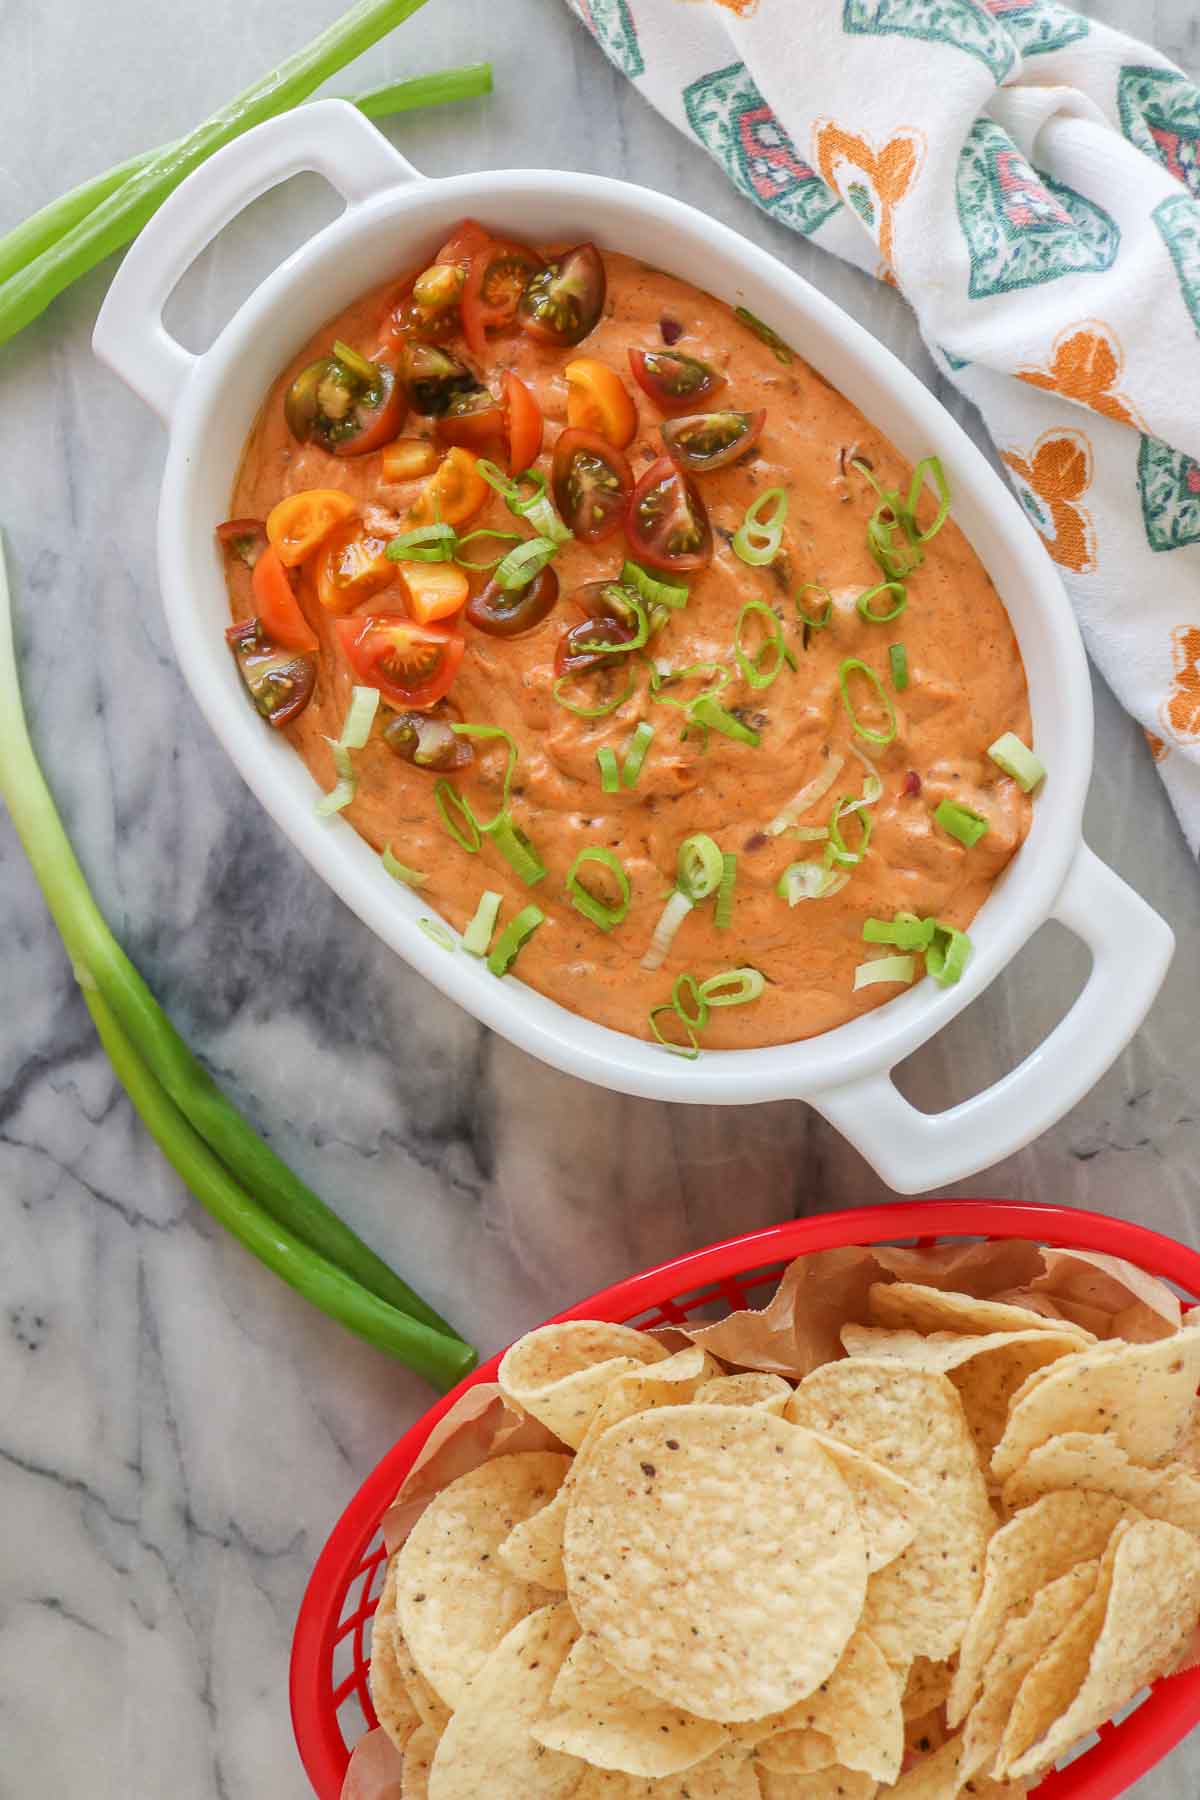 Chili cream cheese dip in a serving dish alongside a basket of tortilla chips.